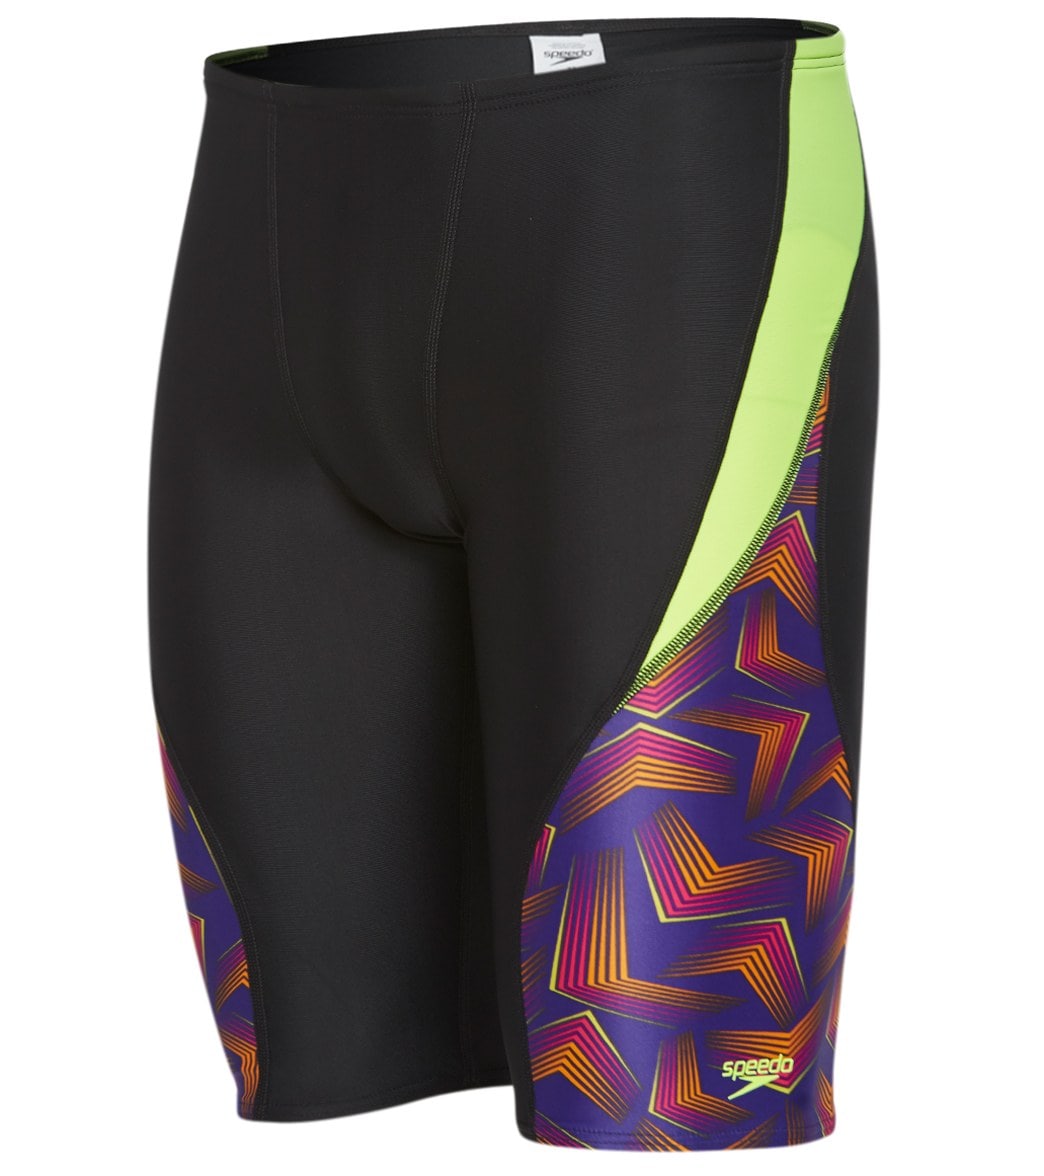 Speedo Men's Play The Angles Jammer Swimsuit at SwimOutlet.com